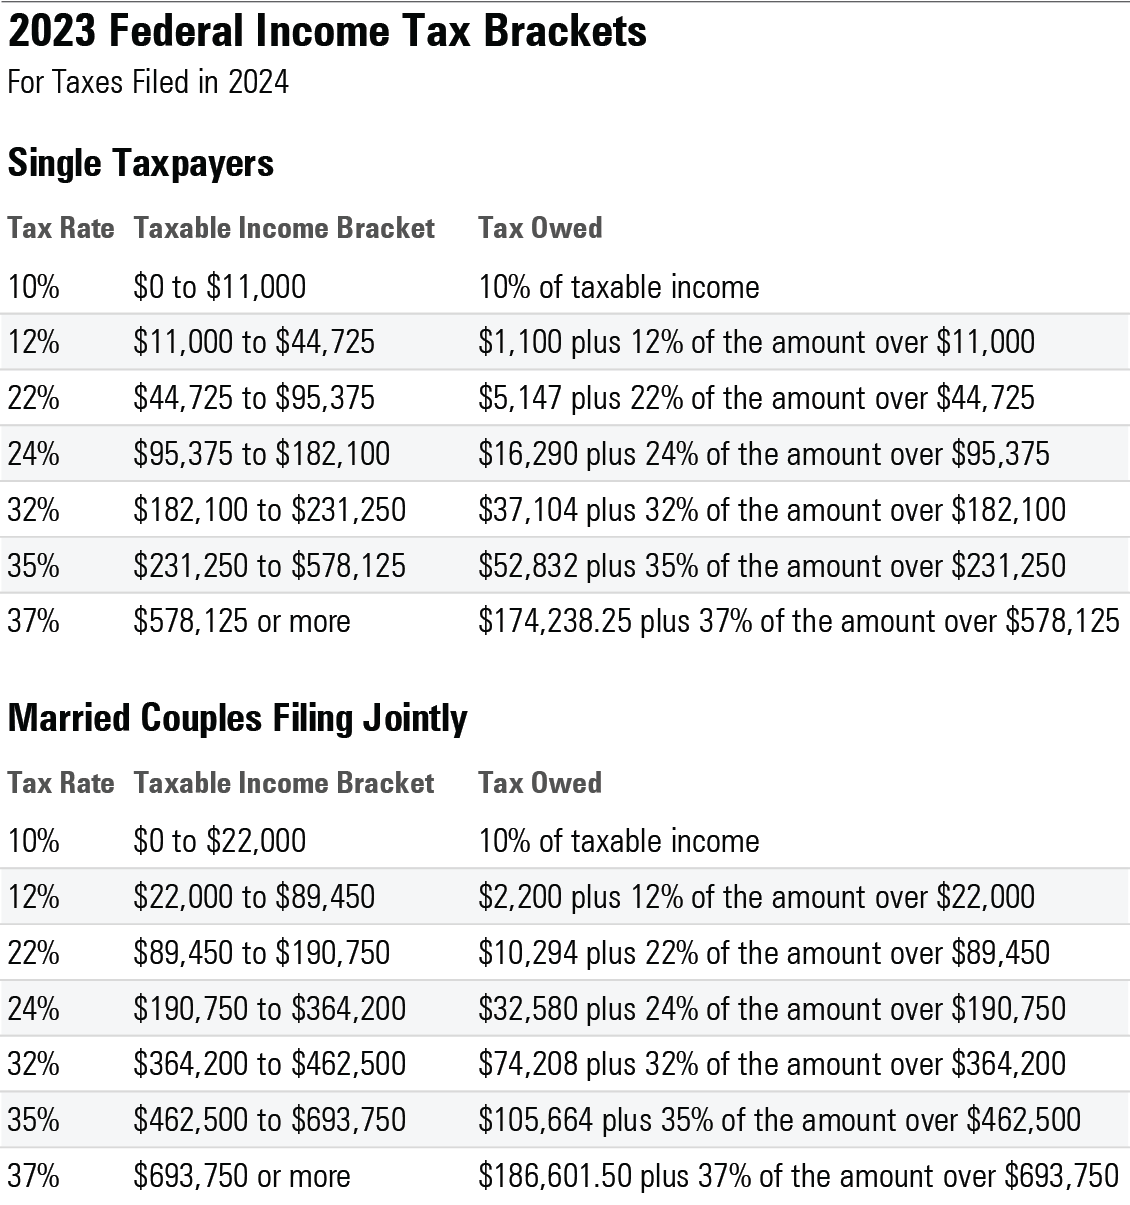 10%: Single taxpayers with incomes of $11,000 or less; married couples filing jointly with incomes of $22,000 or less.
12%: Single taxpayers with incomes between $11,000 and $44,725; married couples filing jointly with incomes between $22,000 and $89,450.
22%: Single taxpayers with incomes between $44,725 and $95,375; married couples filing jointly with incomes between $89,450 and $190,750.
24%: Single taxpayers with incomes between $95,375 and $182,100; married couples filing jointly with incomes between $190,750 and $364,200.
32%: Single taxpayers with incomes between $182,100 and $231,250; married couples filing jointly with incomes between $364,200 and $462,500.
35%: Single taxpayers with incomes between $231,250 and $578,125; married couples filing jointly with incomes between $462,500 and $693,750.
37%: Single taxpayers with incomes of $578,125 or more; married couples filing jointly with incomes of $693,750 or more.